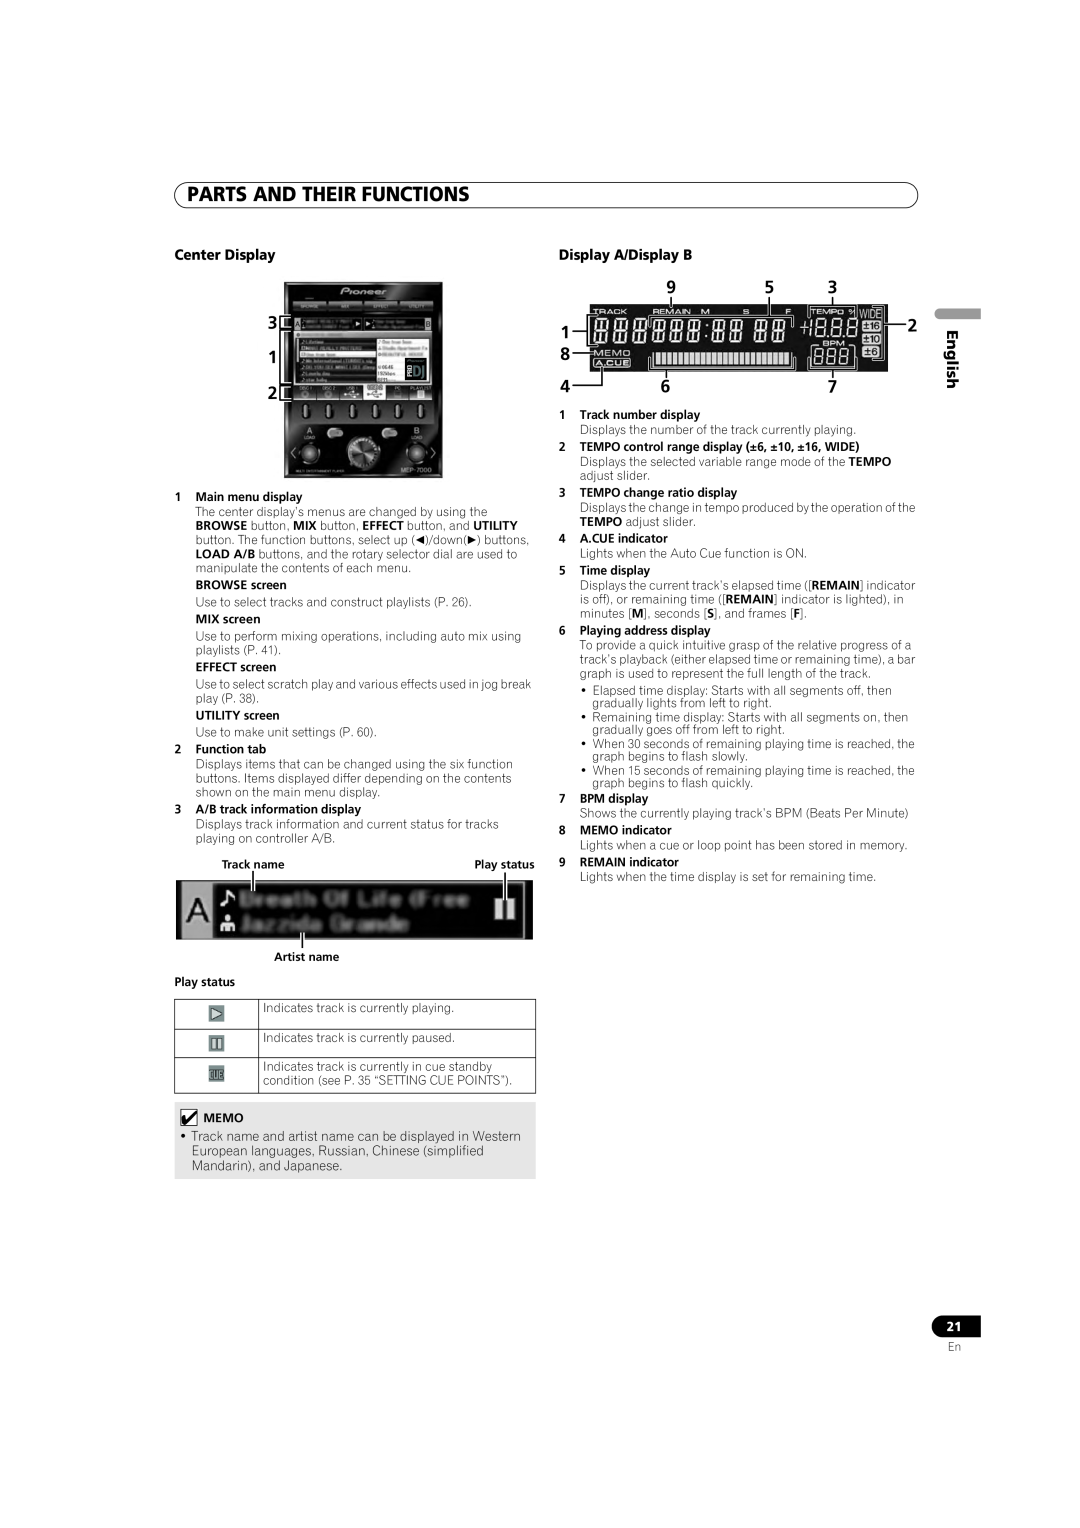 Pioneer MEP-7000 Parts And Their Functions, Center Display, Display A/Display B, Mandarin, and Japanese 